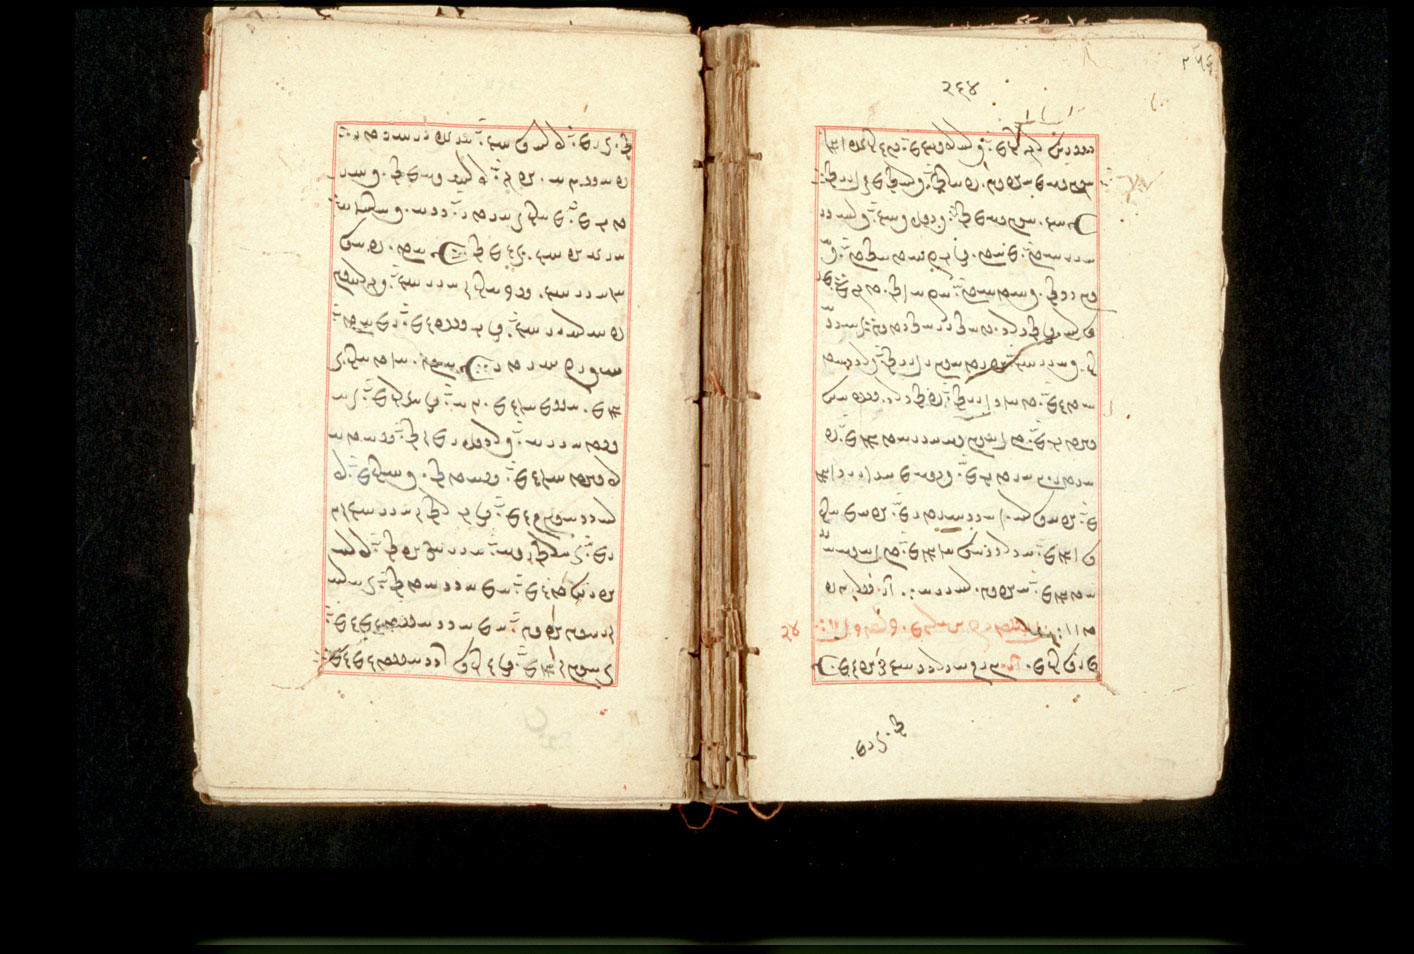 Folios 264v (right) and 265r (left)